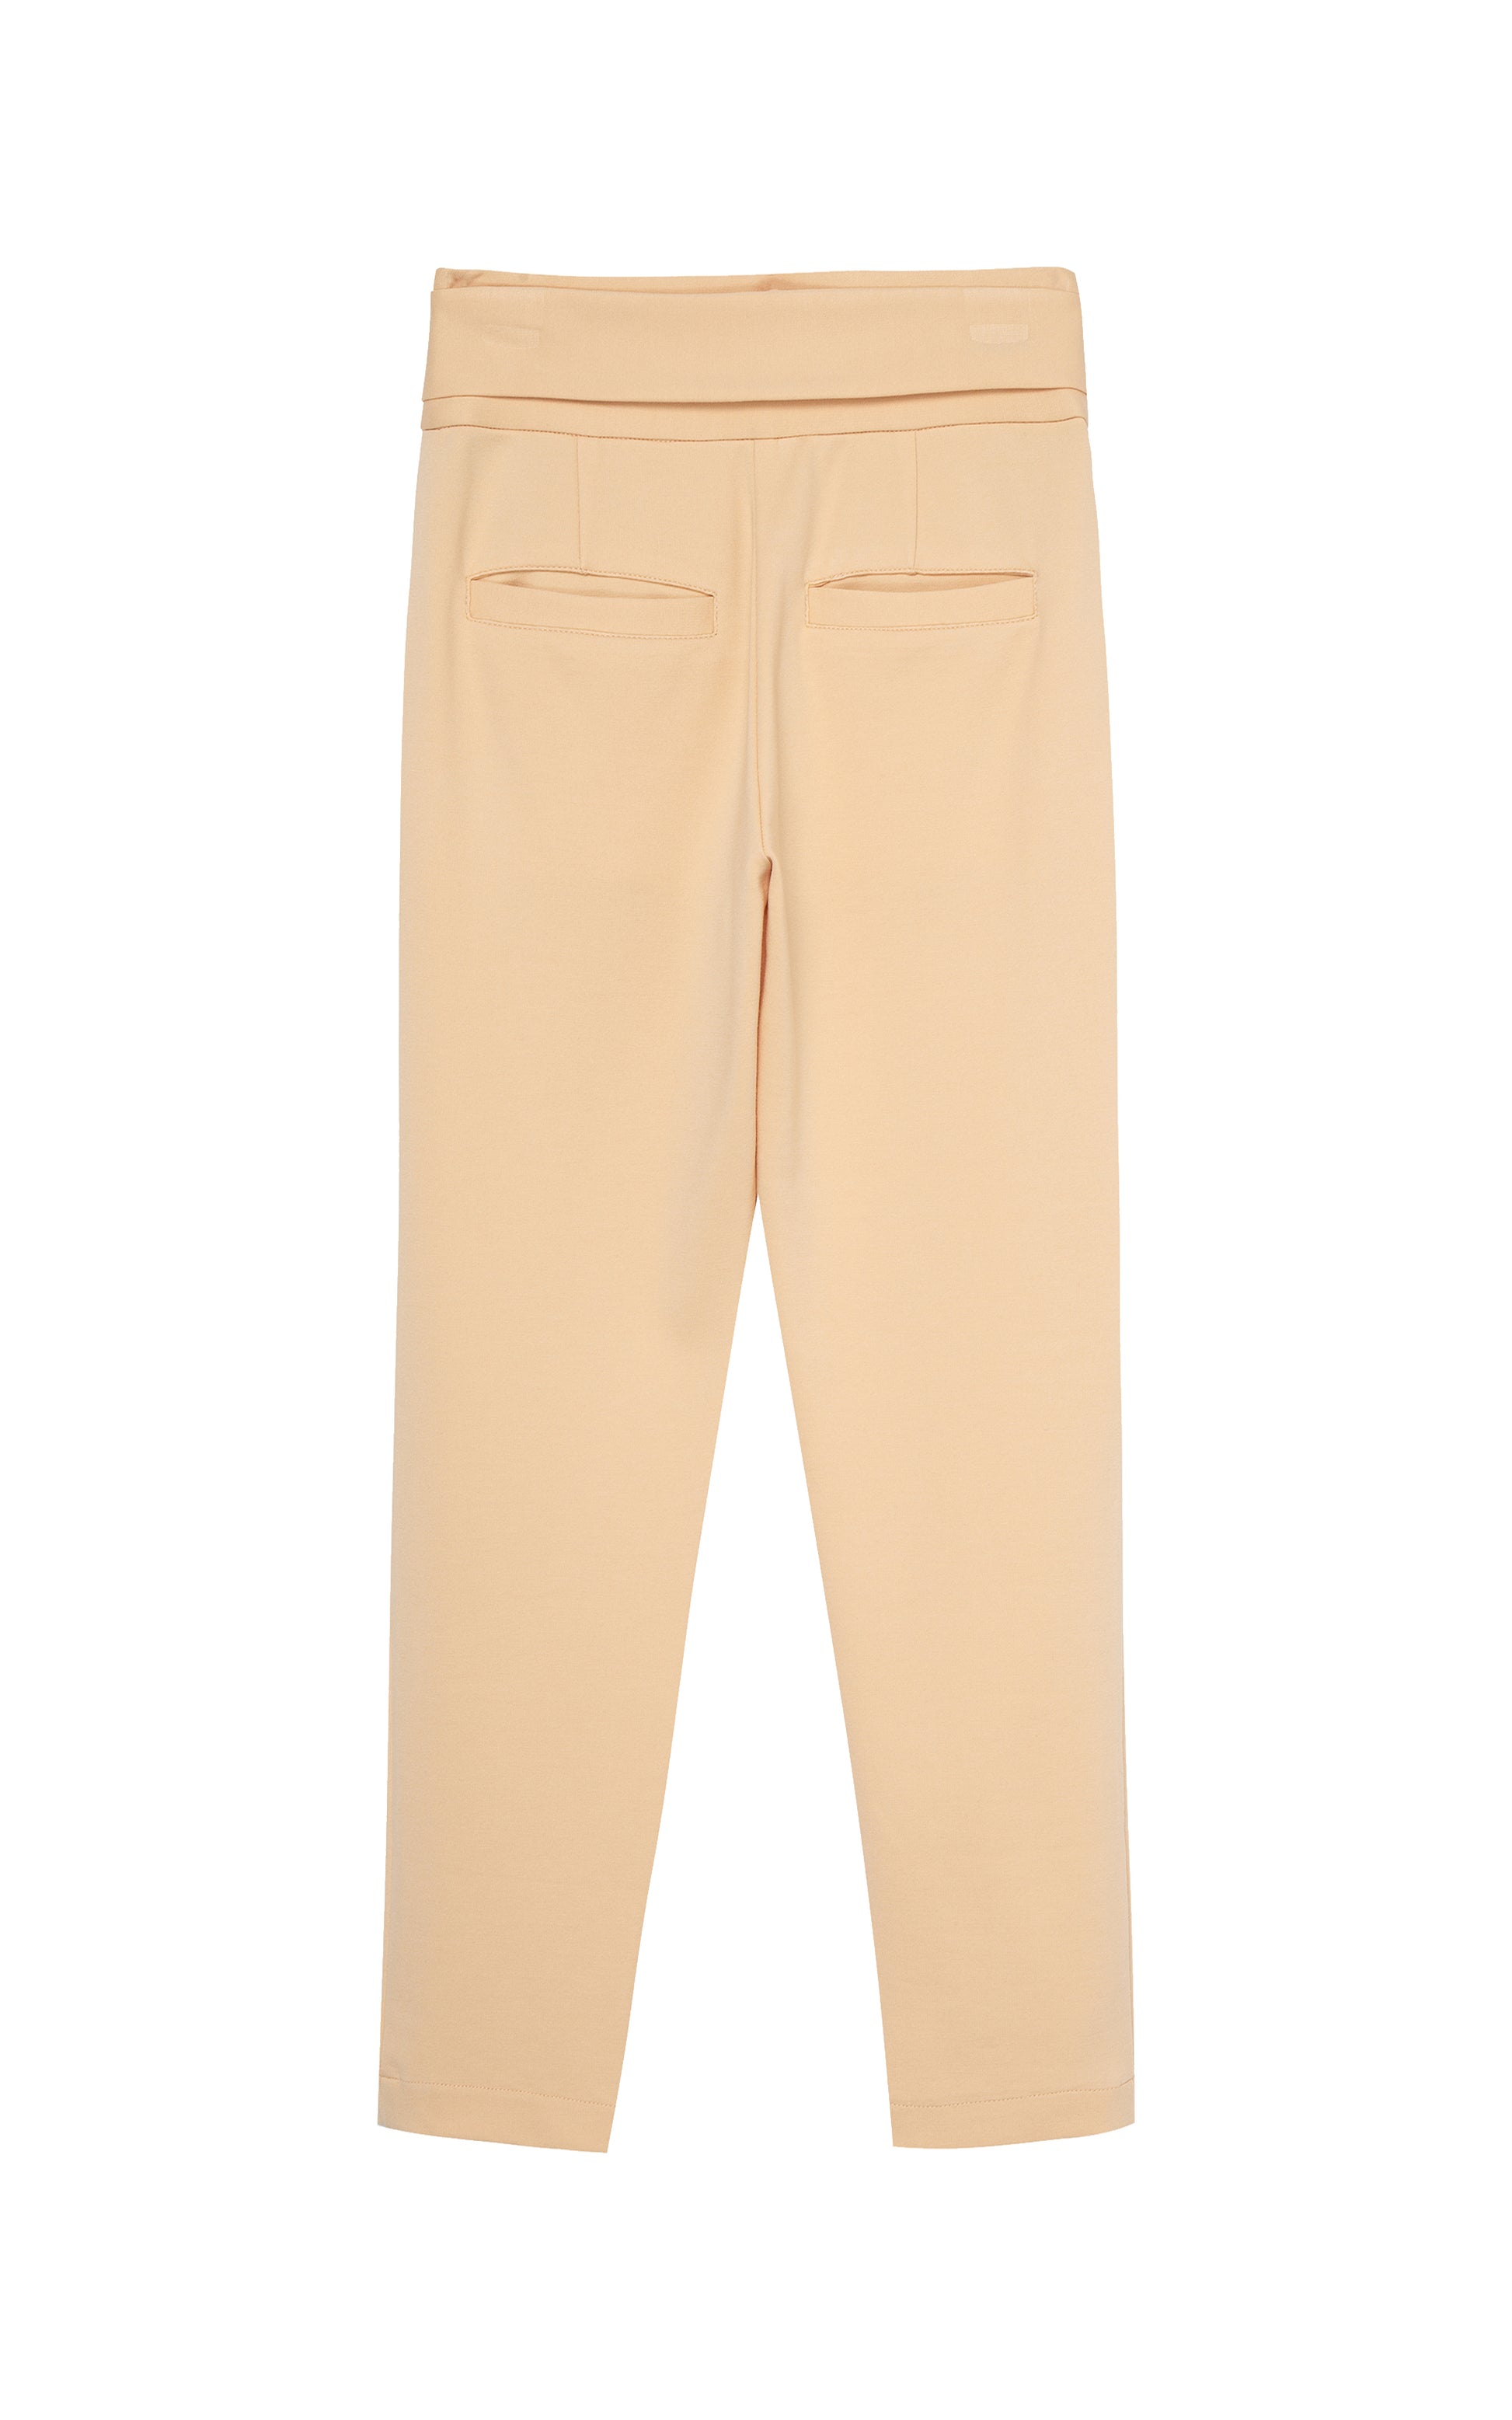 Back view of high-waisted khaki fabric pant